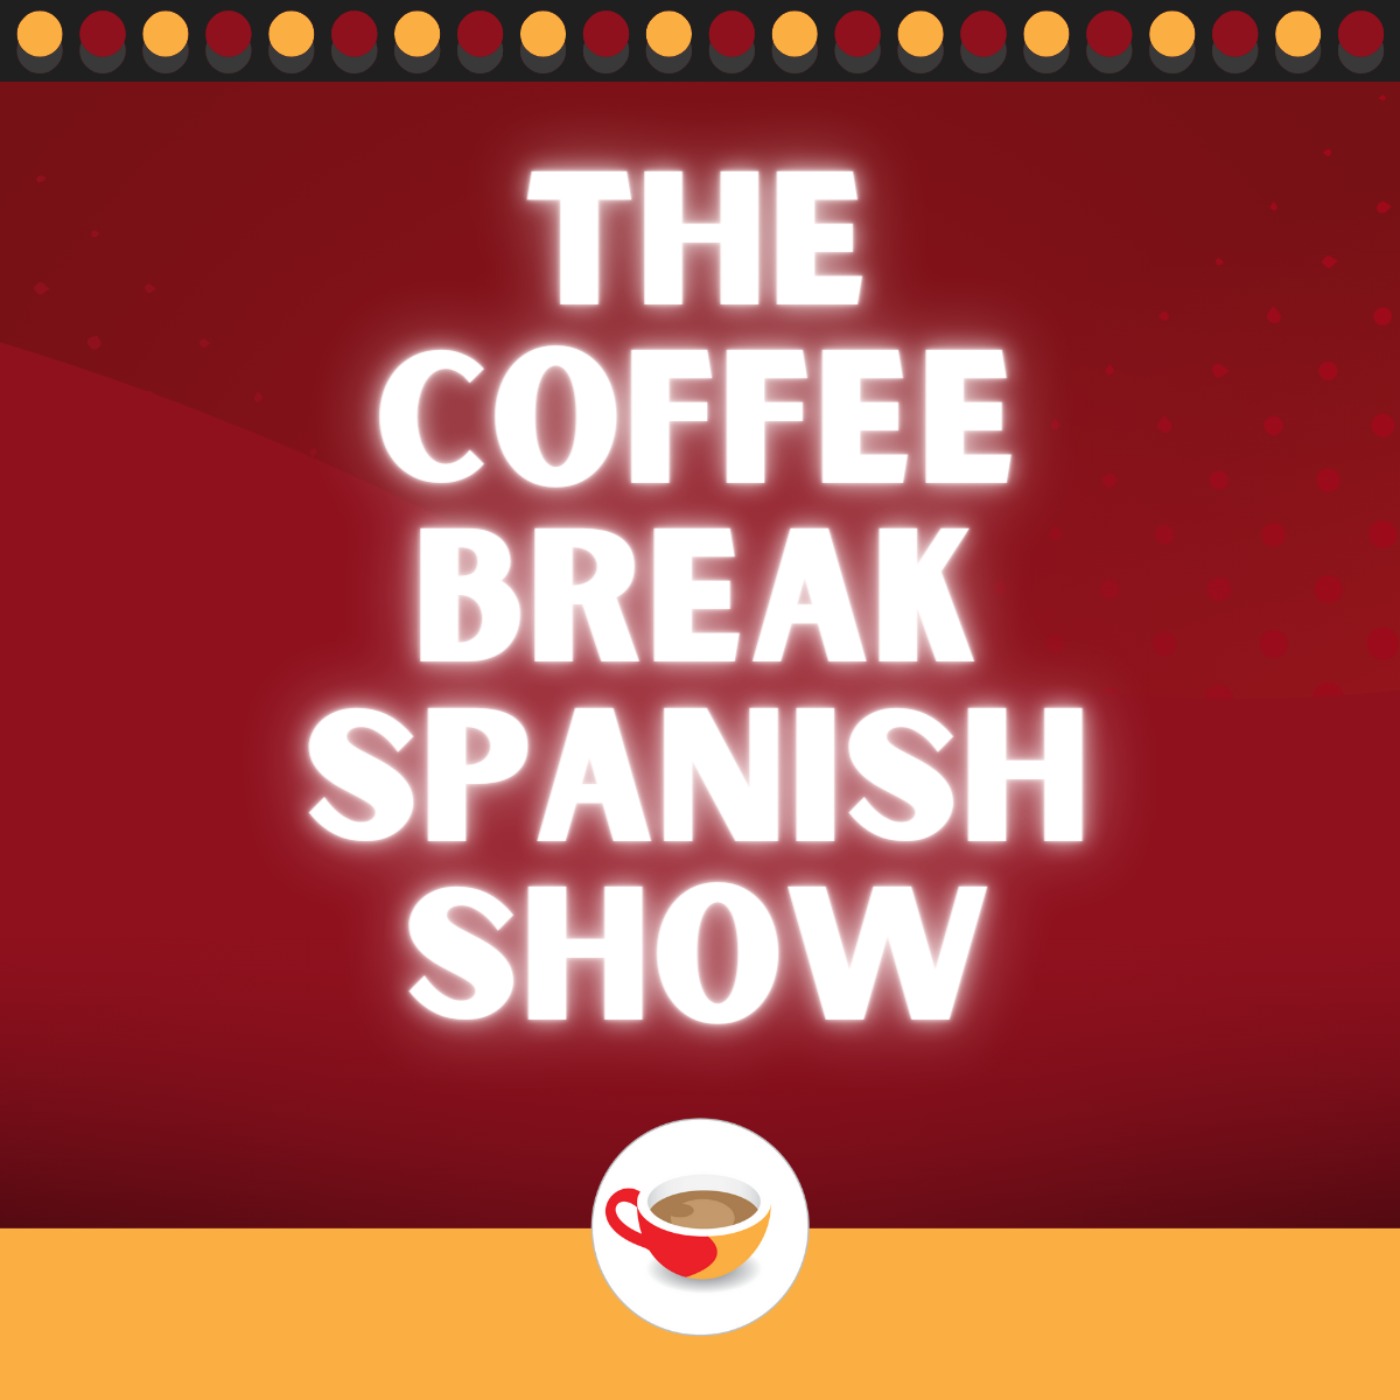 How to know which syllable to stress - Spanish accent marks | The Coffee Break Spanish Show 1.06